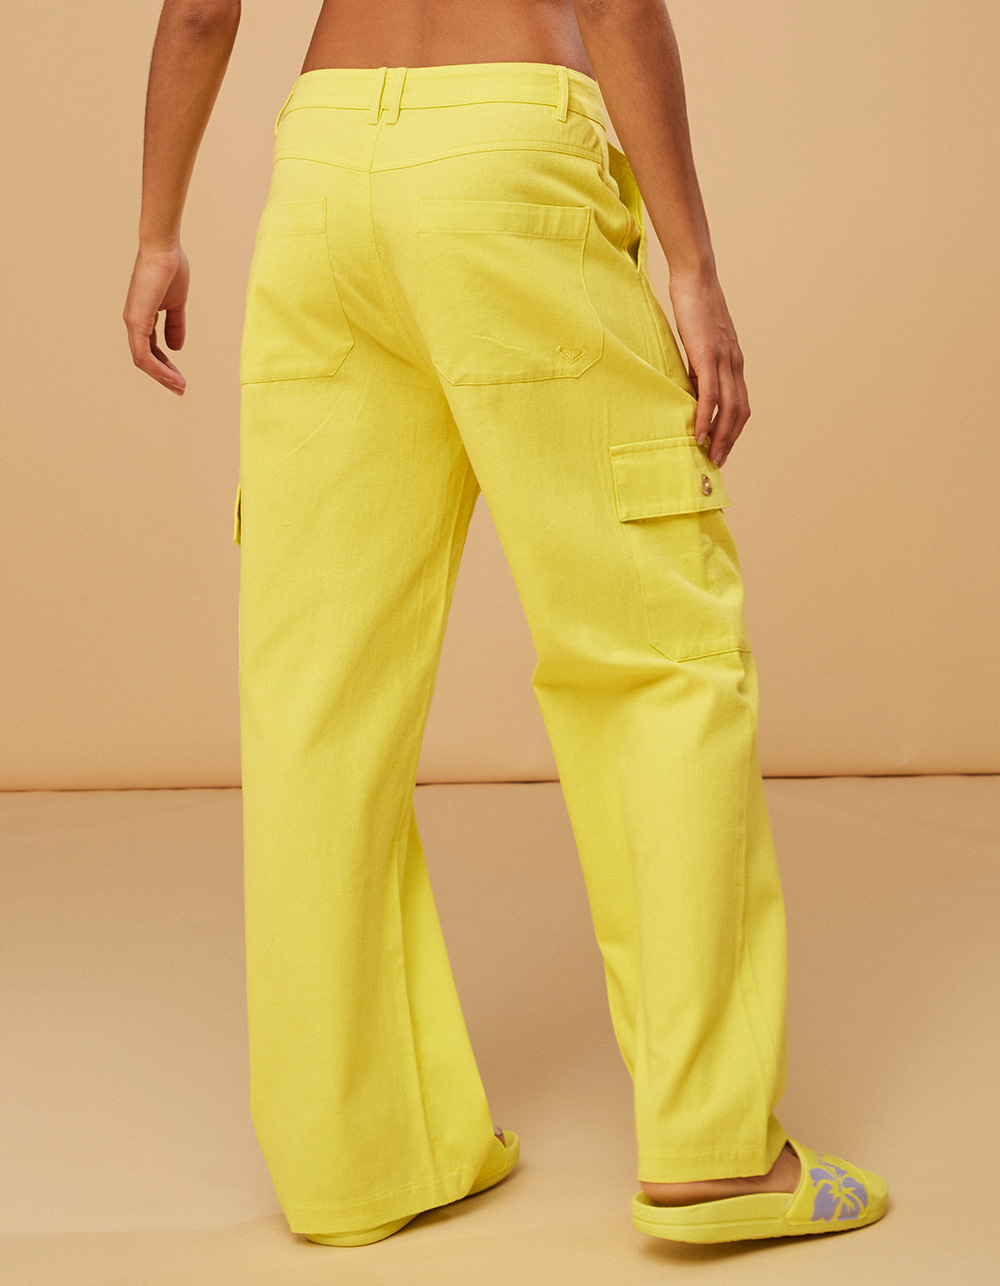 Womens Cargo | Tillys Surf YELLOW x Bosworth ROXY Kind Pants - Kate Kate